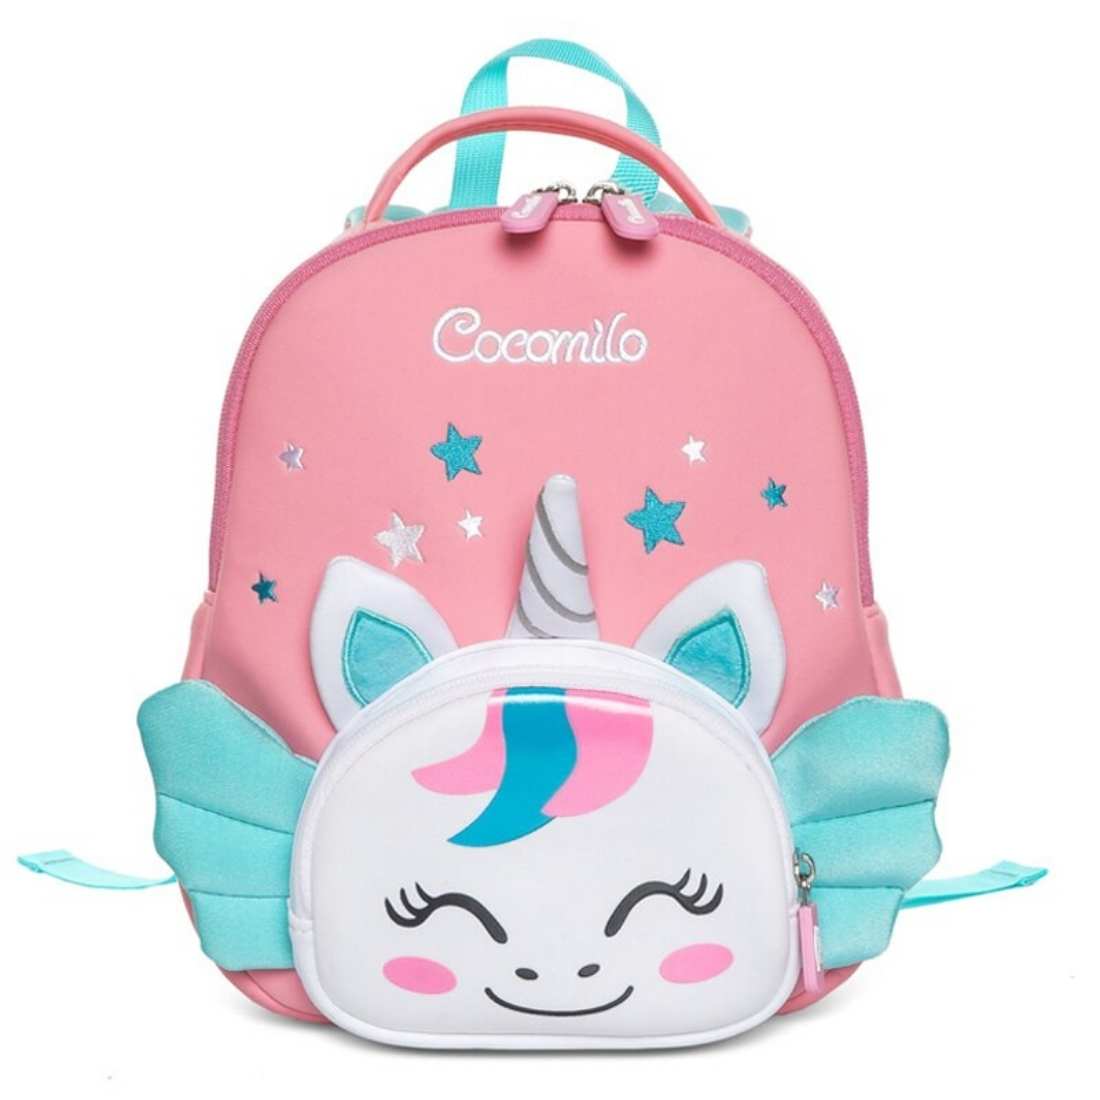 3D Lightweight Unicorn School Backpack for Girls - Pink & Blue Baby Shop - Review